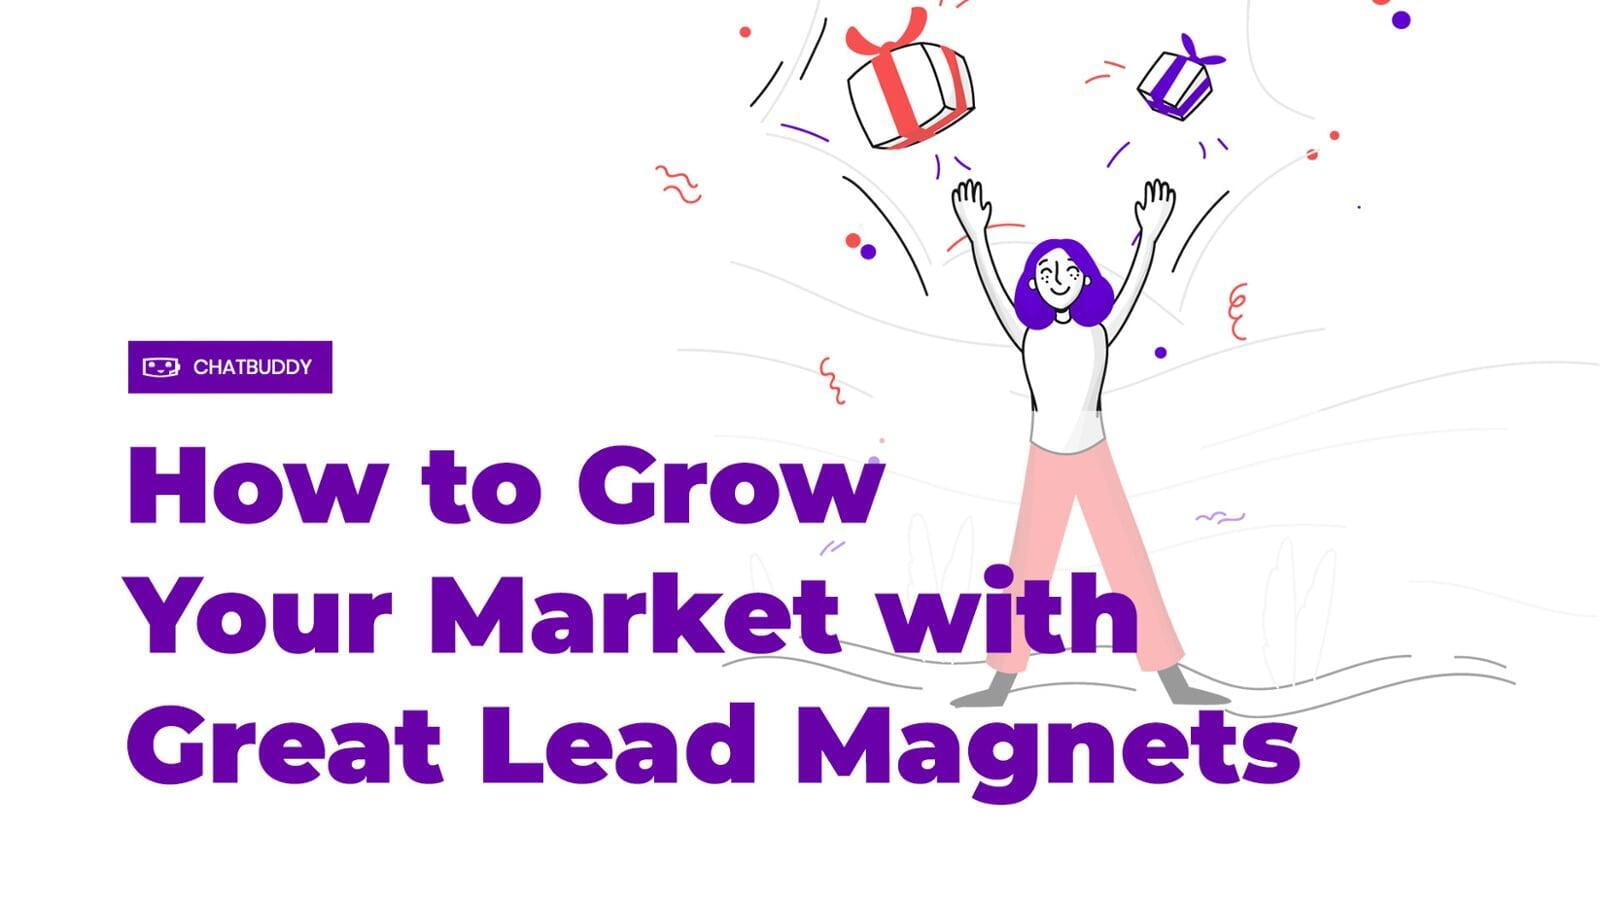 How to Grow Your Market with Great Lead Magnets